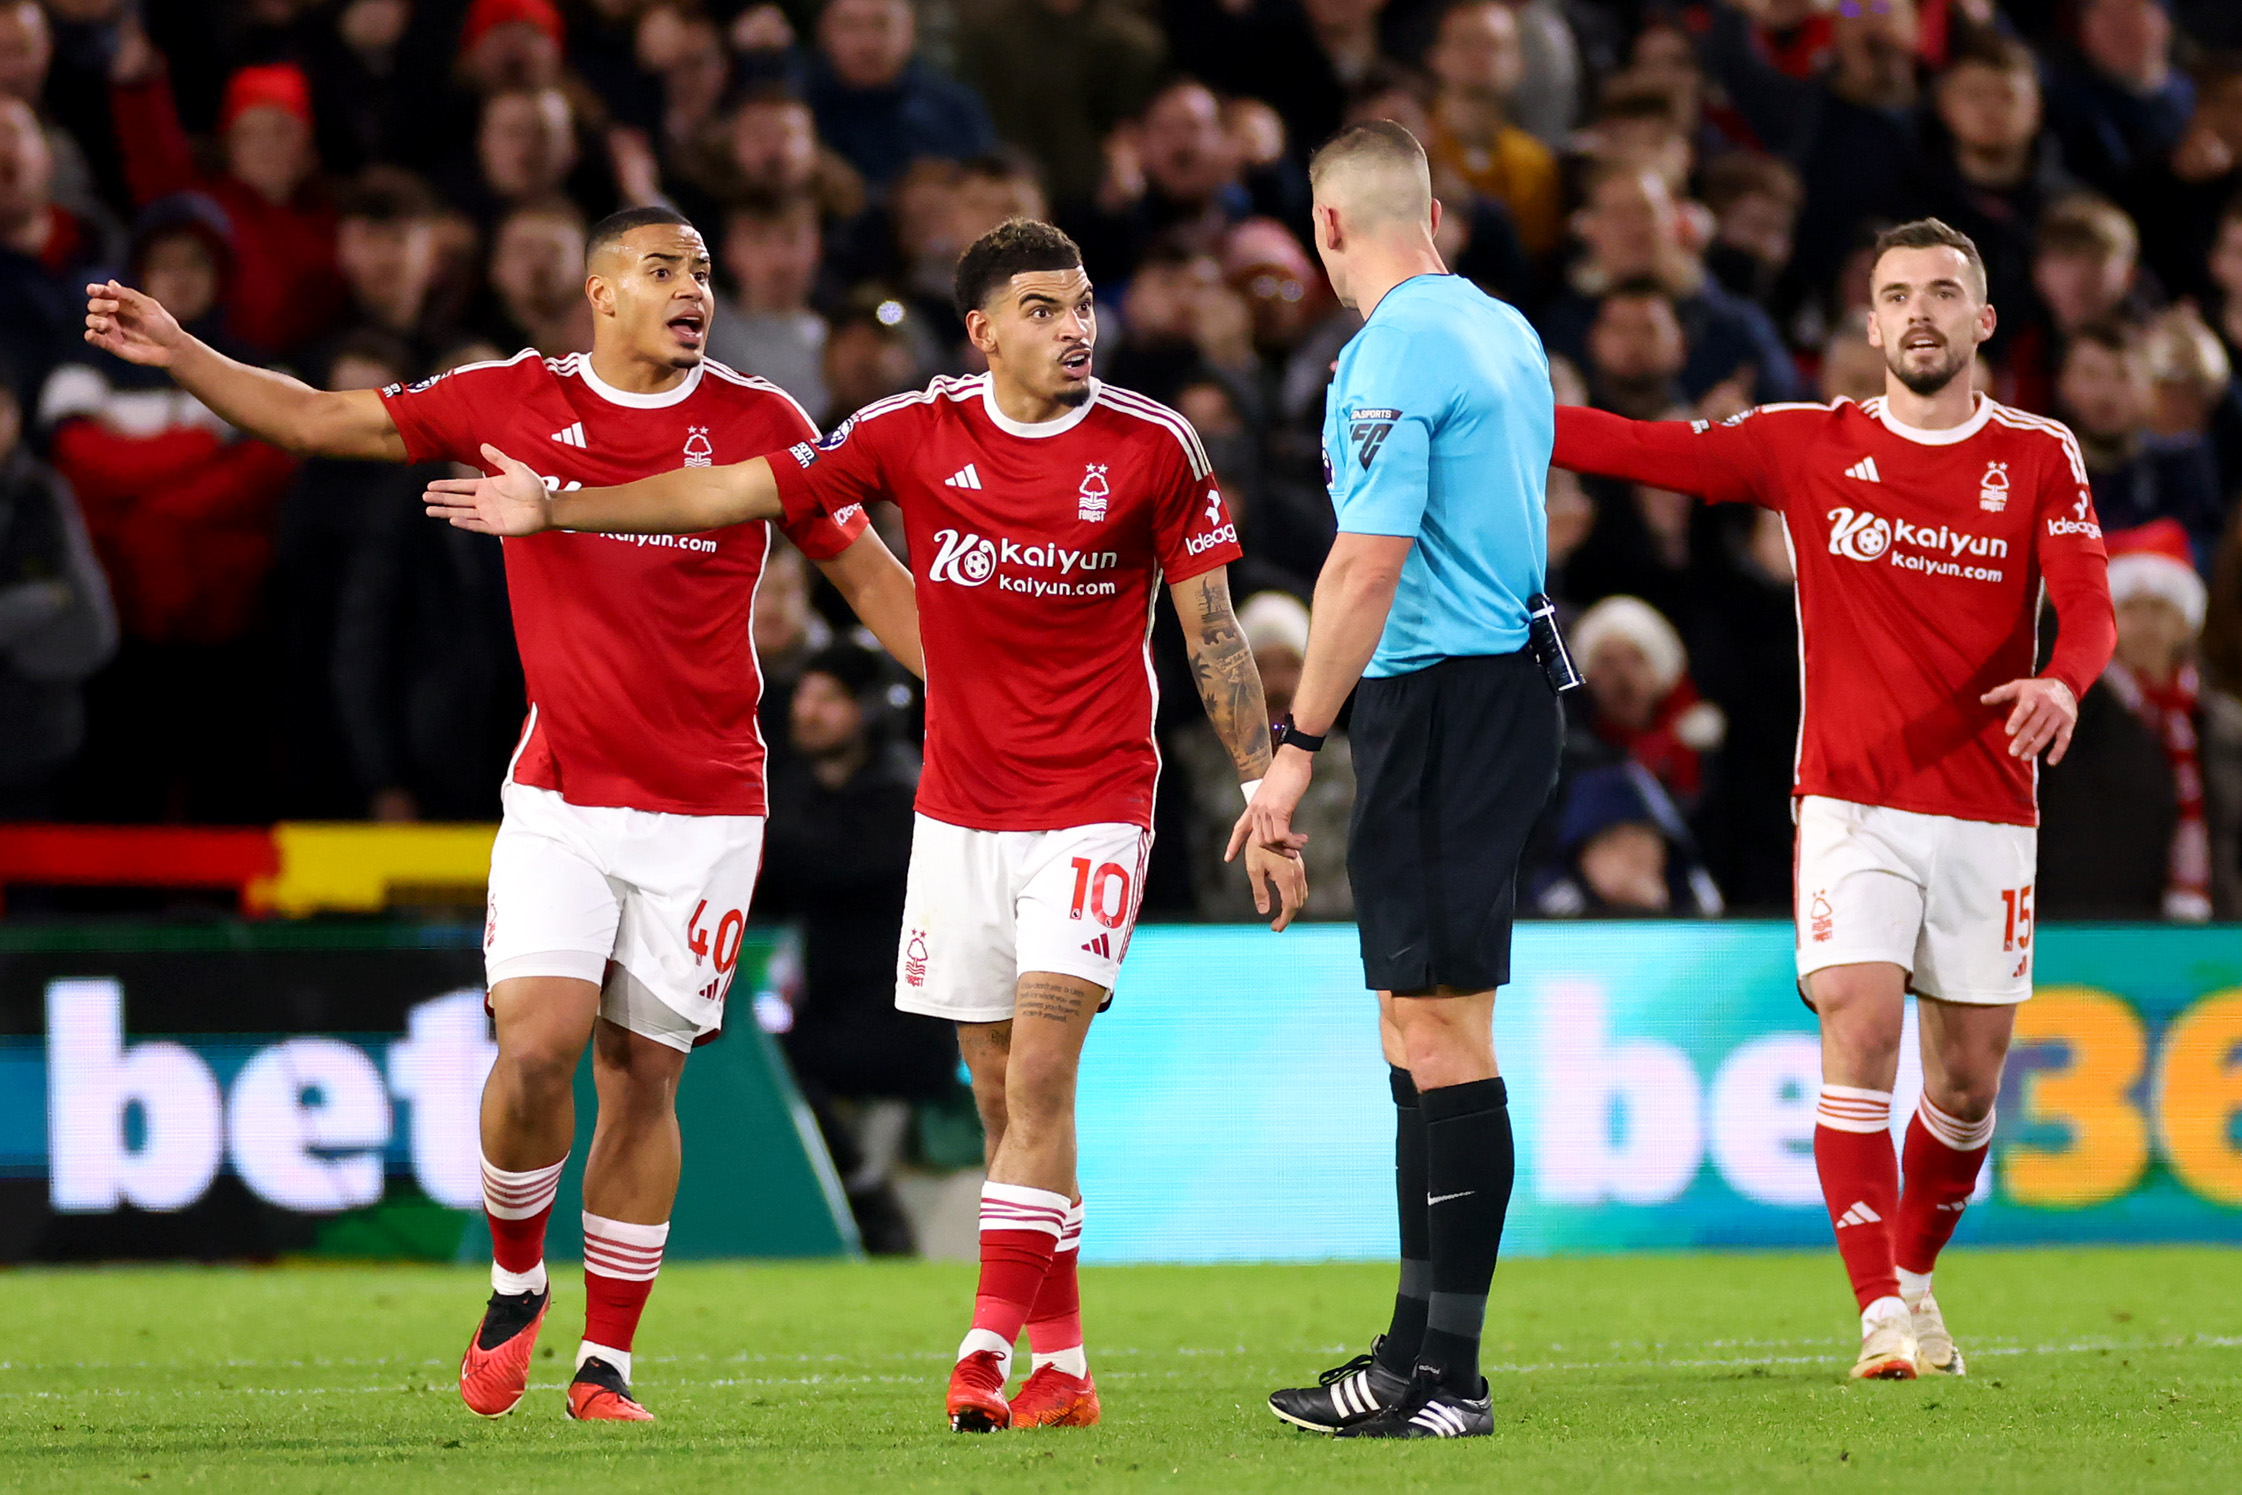 Why Nottingham Forest may face potential Premier League points deduction